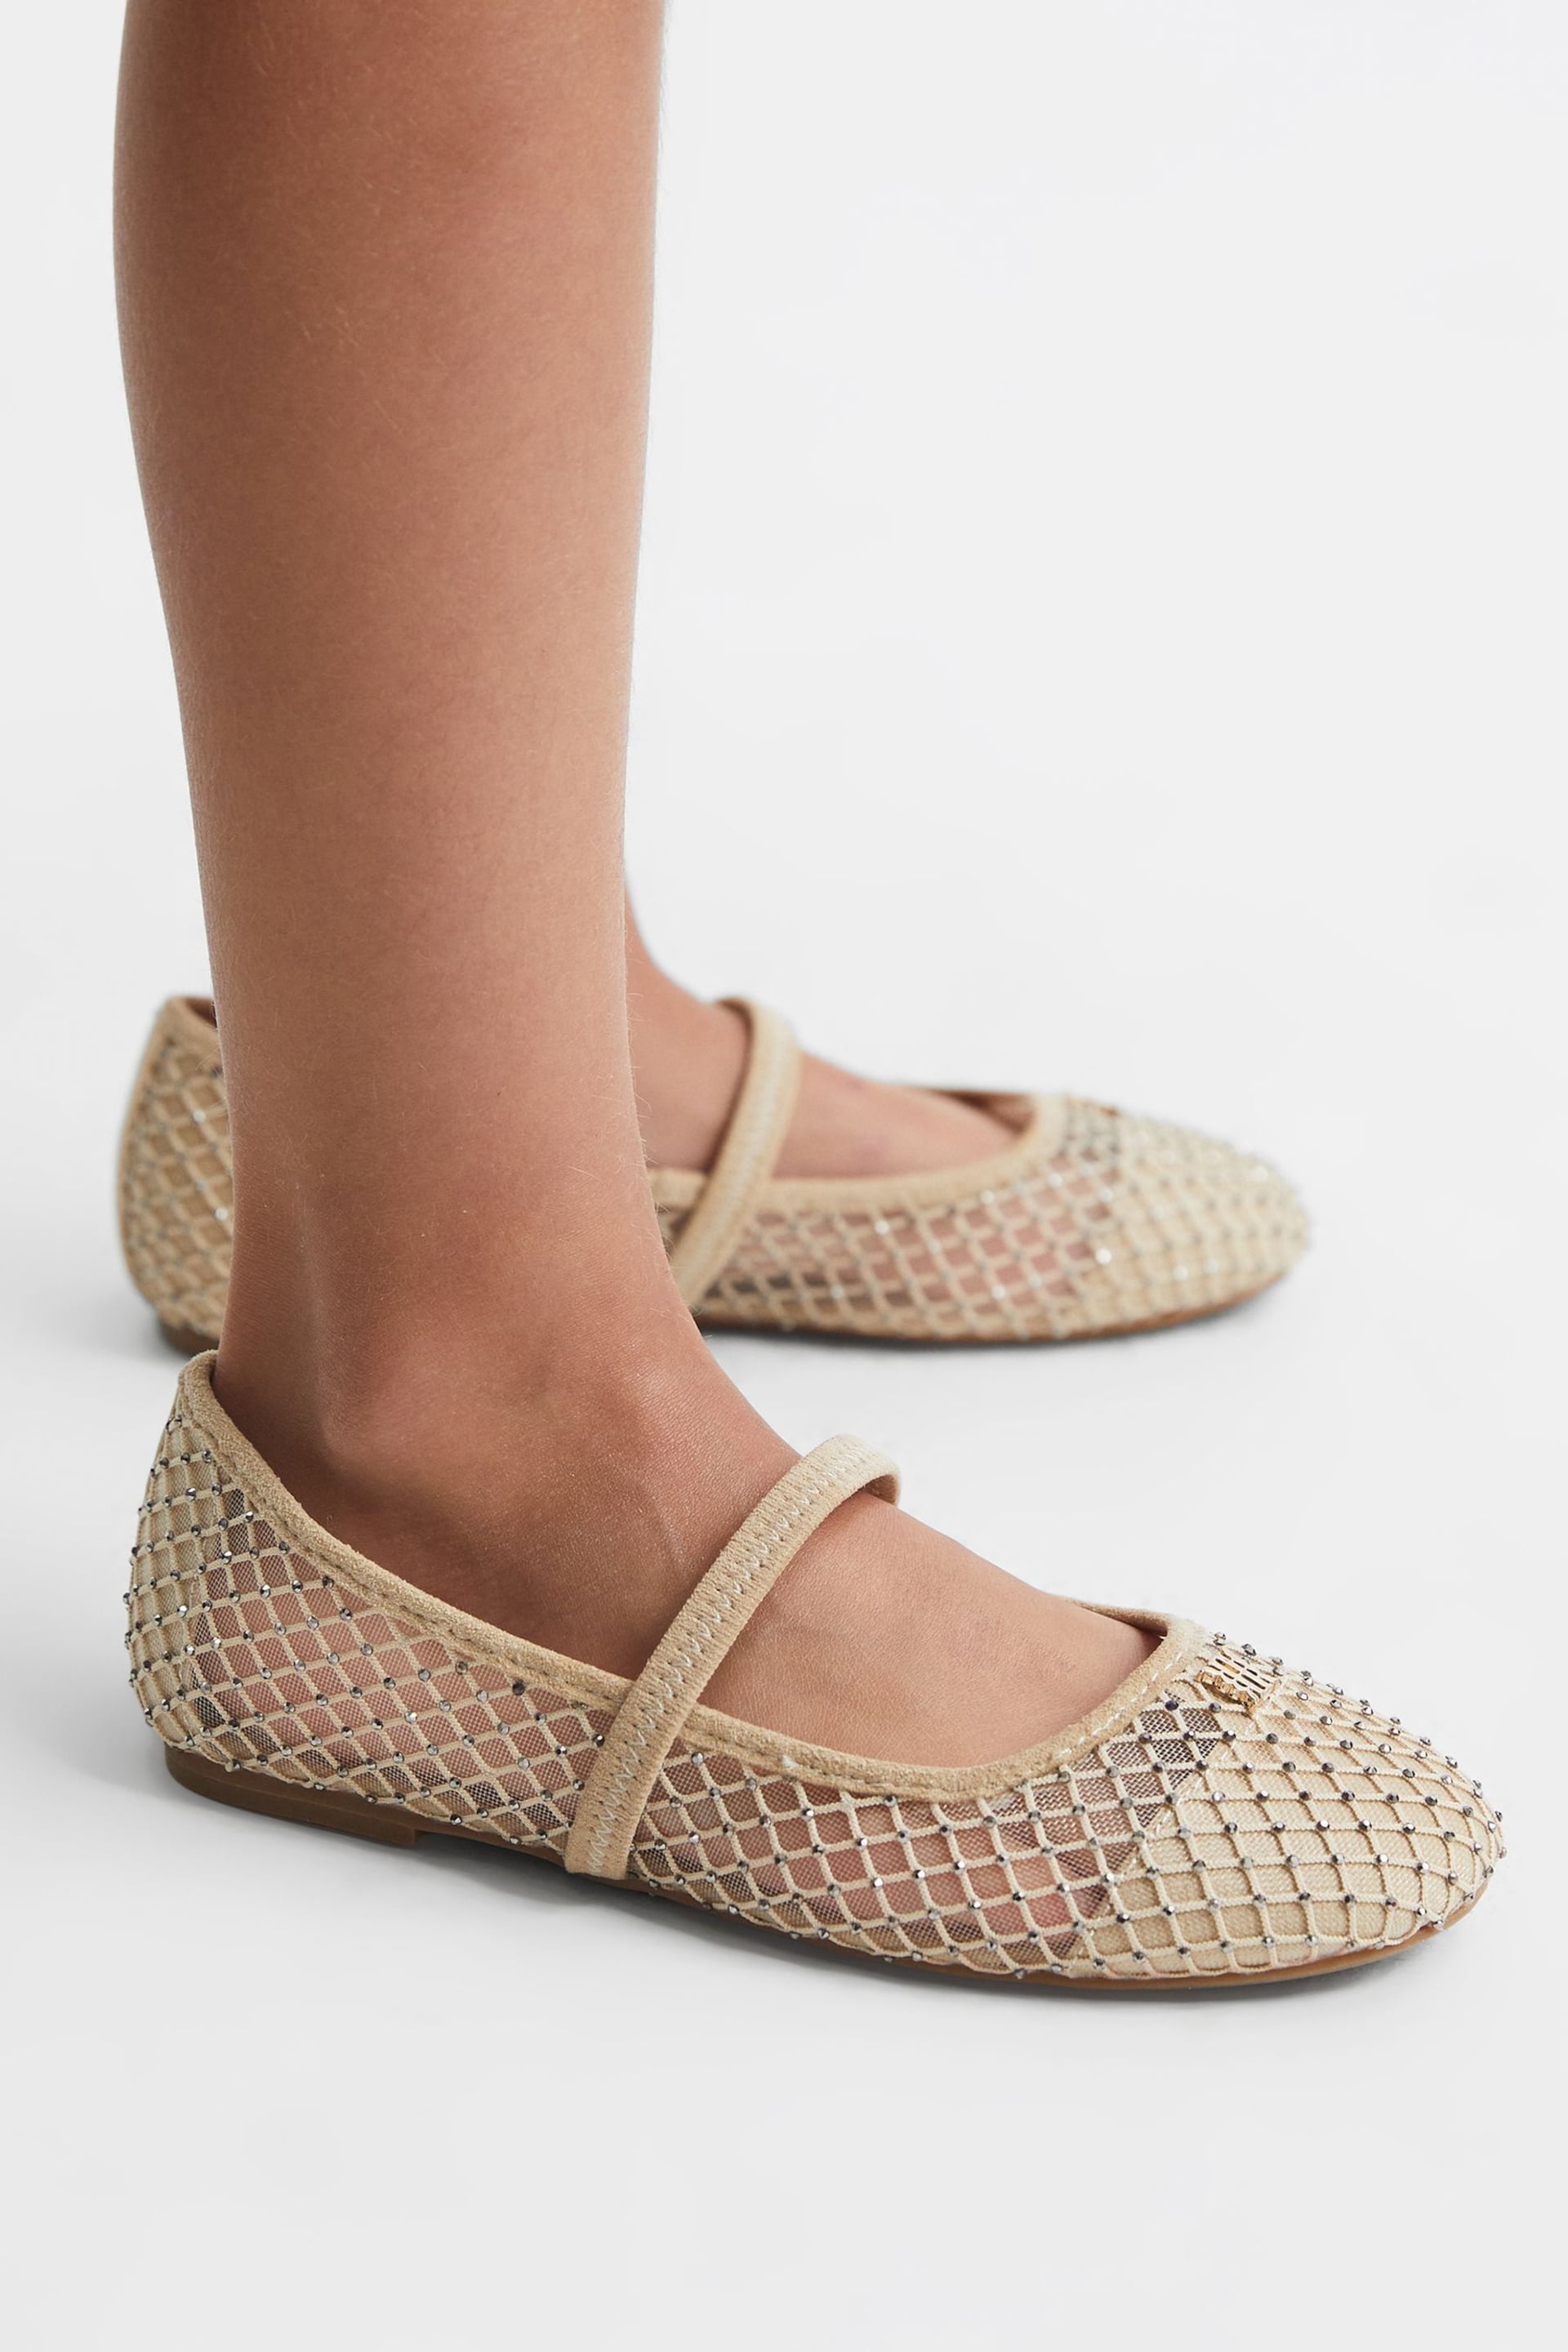 Reiss Nude Amelia Crystal Detail Mesh Ballet Flats - Image 3 of 6